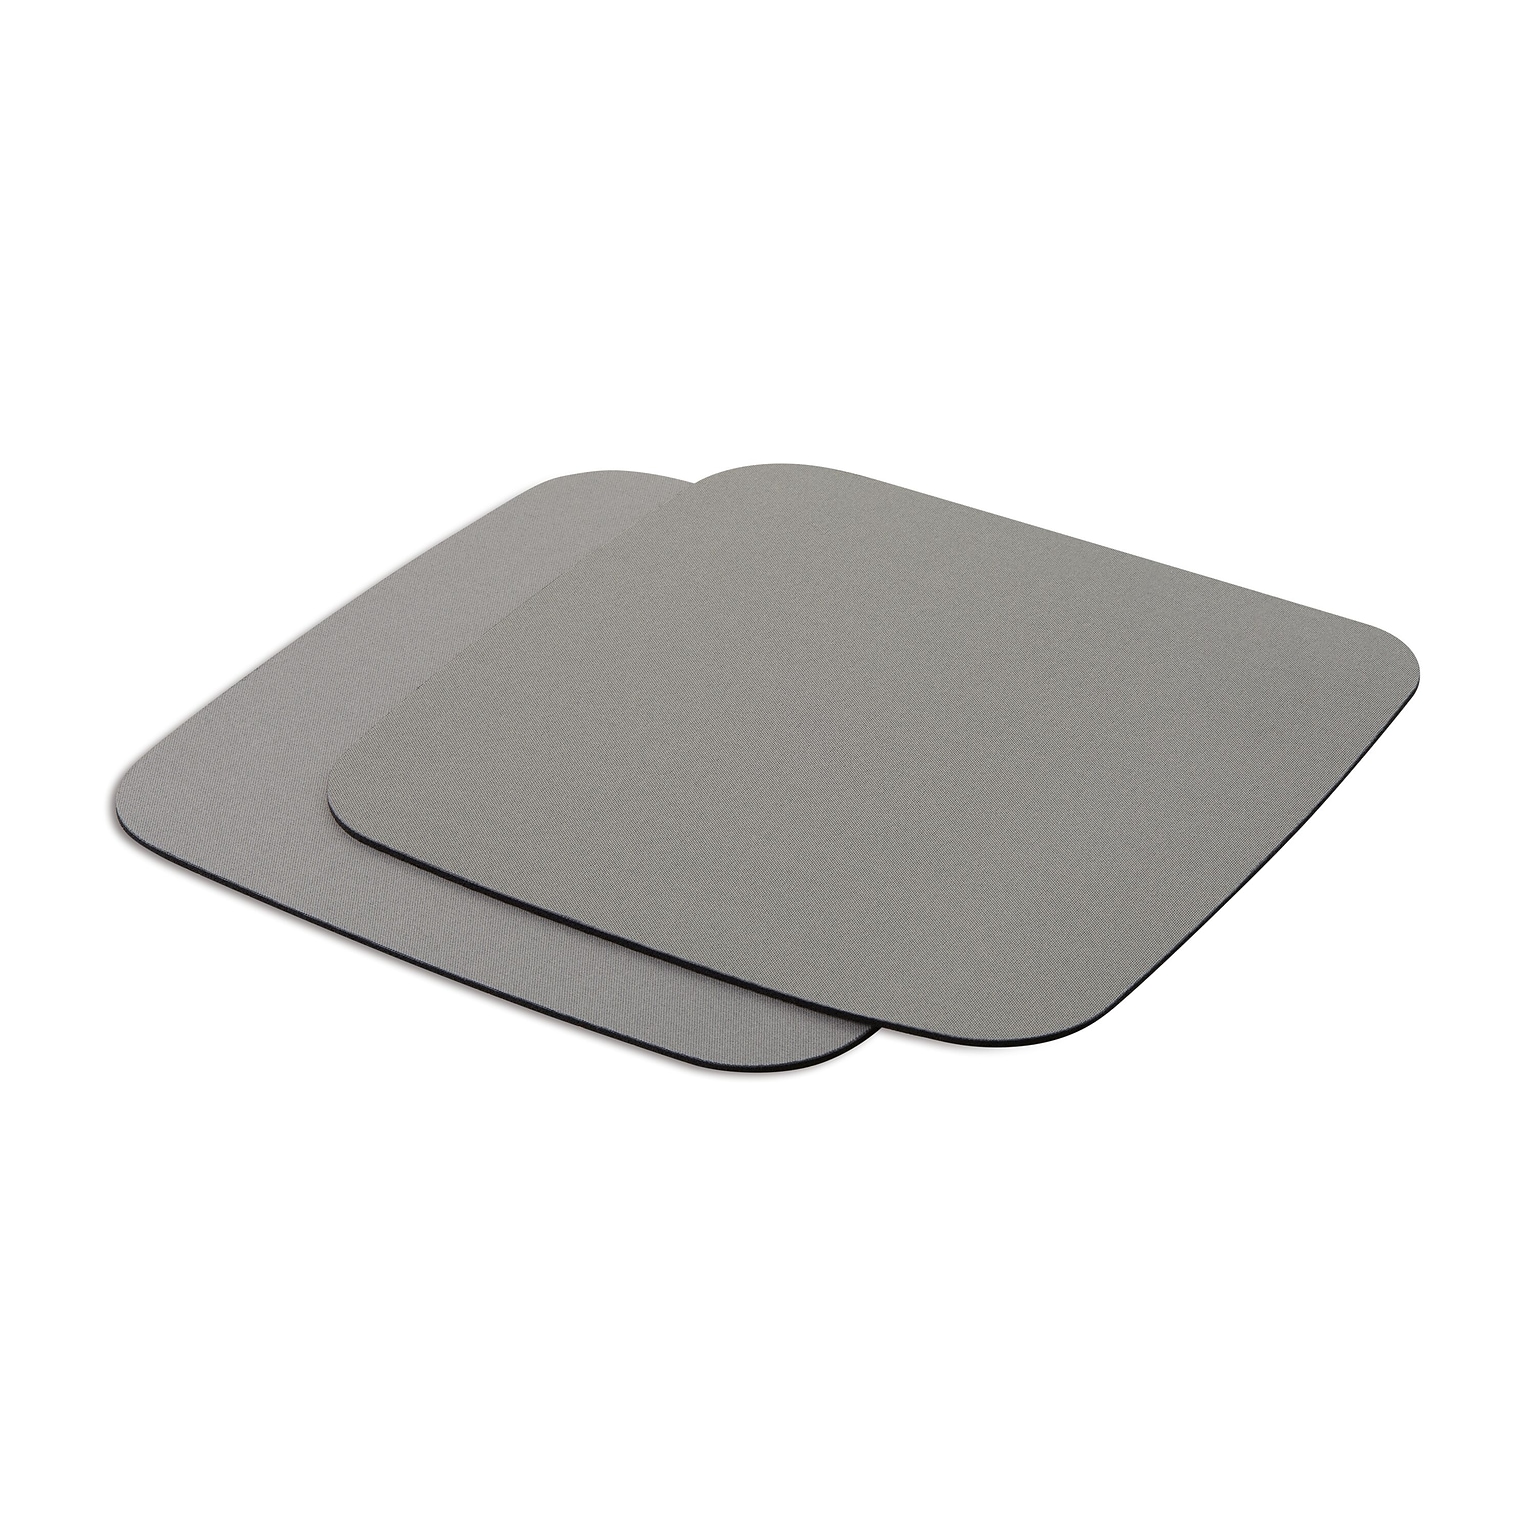 Mouse Pads, Gray, 2/Pack (50680-CP)